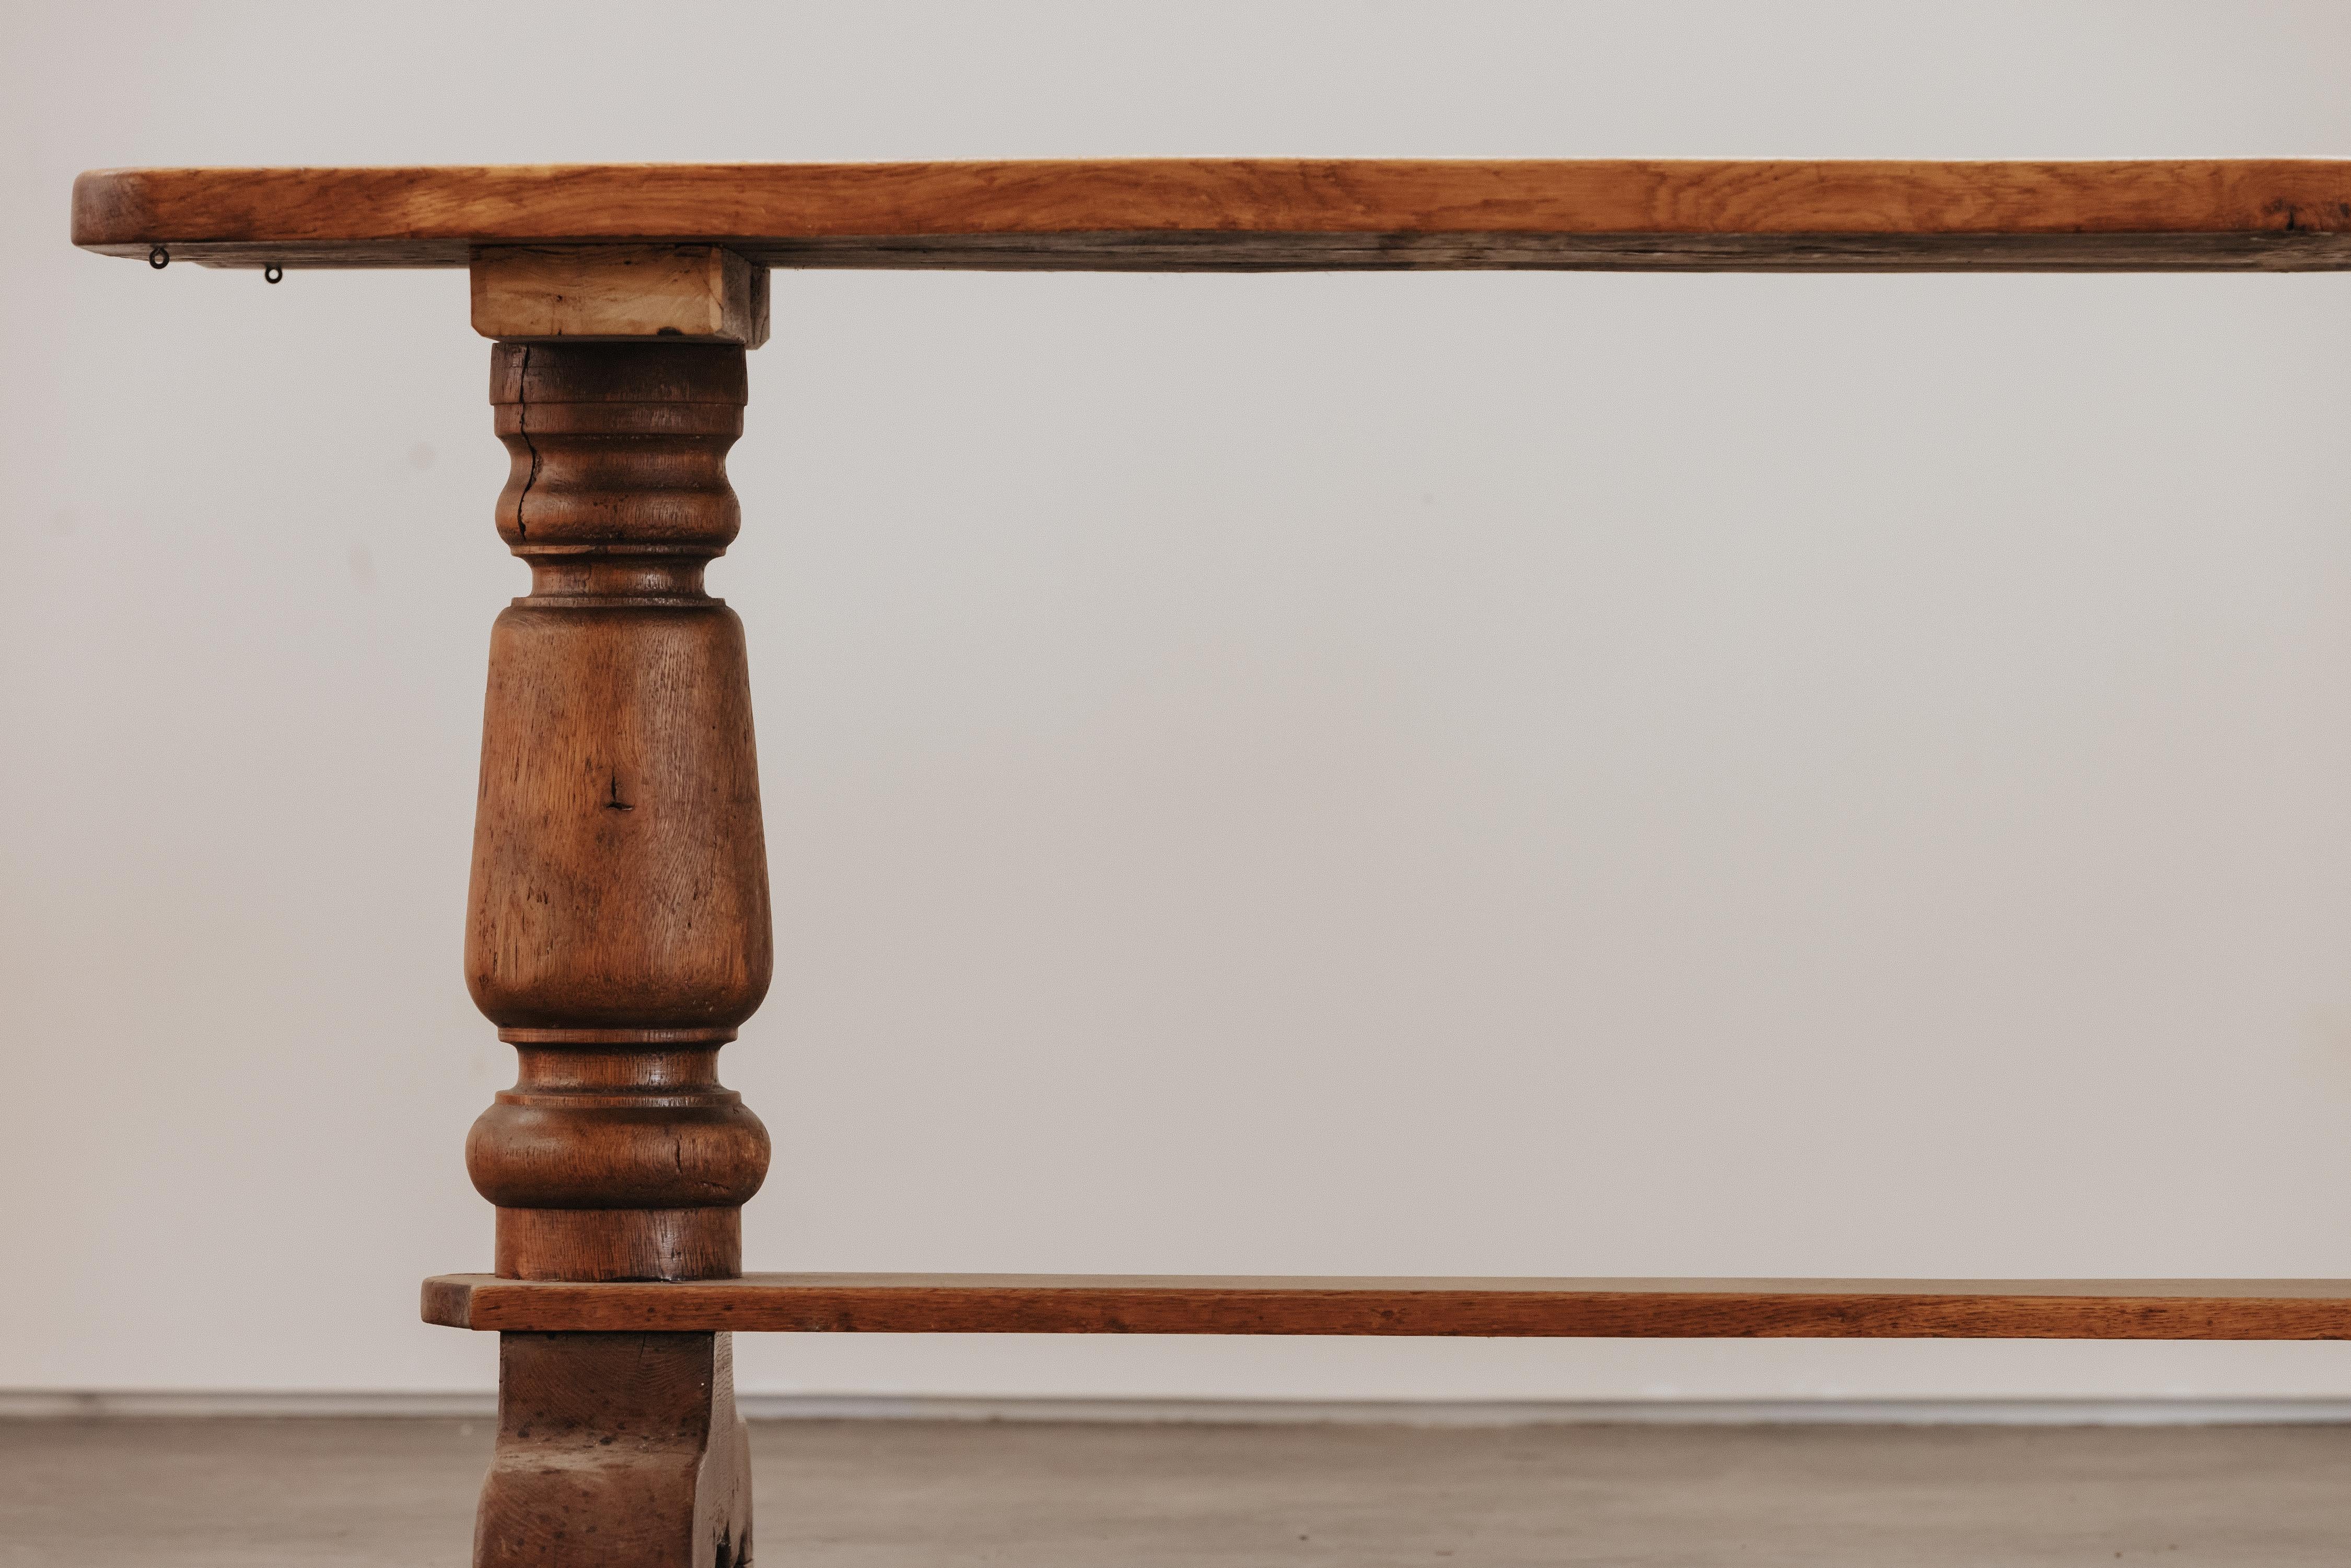 Solid Oak Dining Table From France, Circa 1950.  Solid oak construction with nice curved base.  Nice patina and use.

